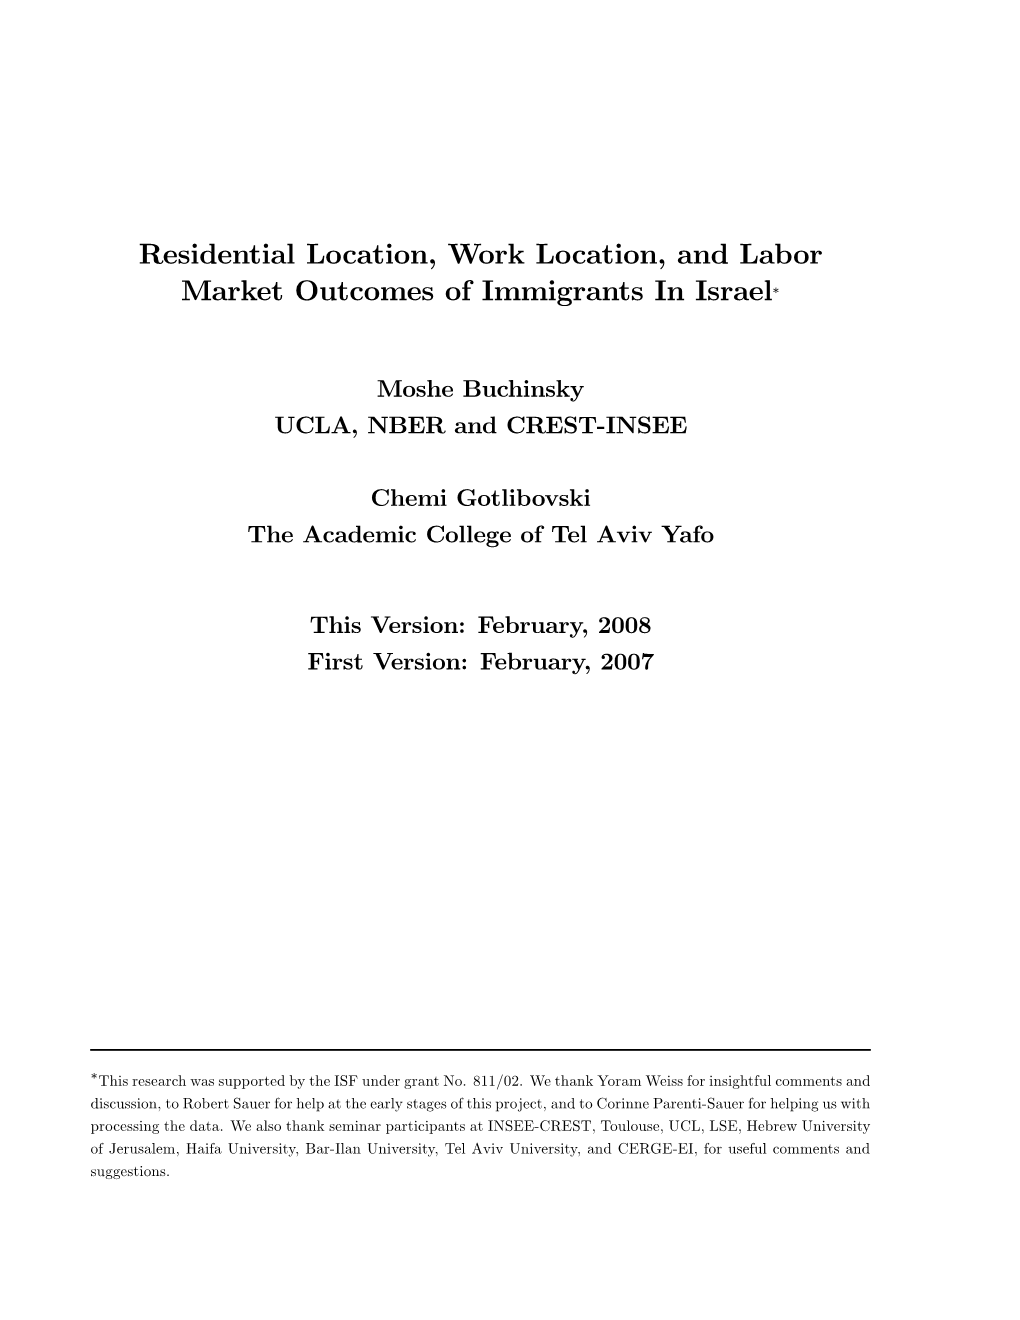 Residential Location, Work Location, and Labor Market Outcomes Of